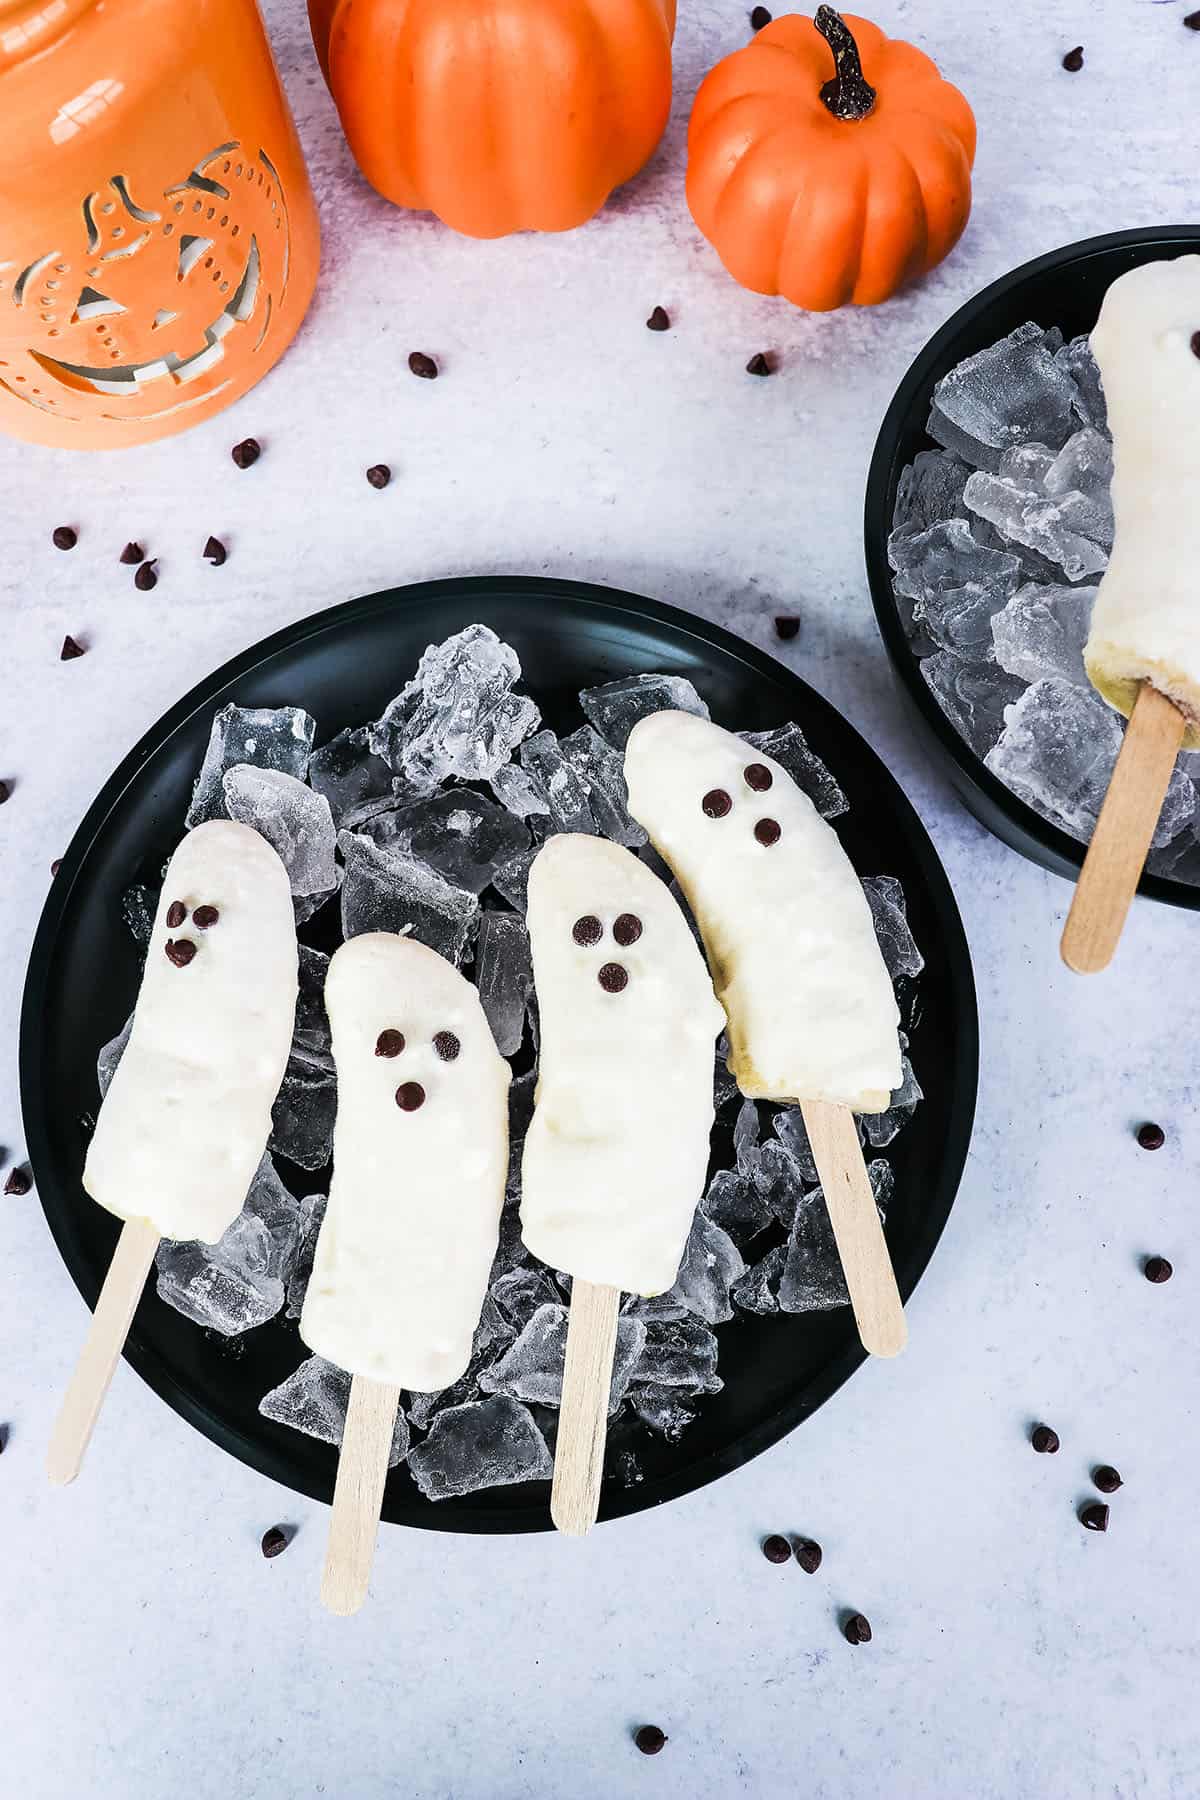 4 Banana pops sitting in a black dish with chocolate chips scattered around.